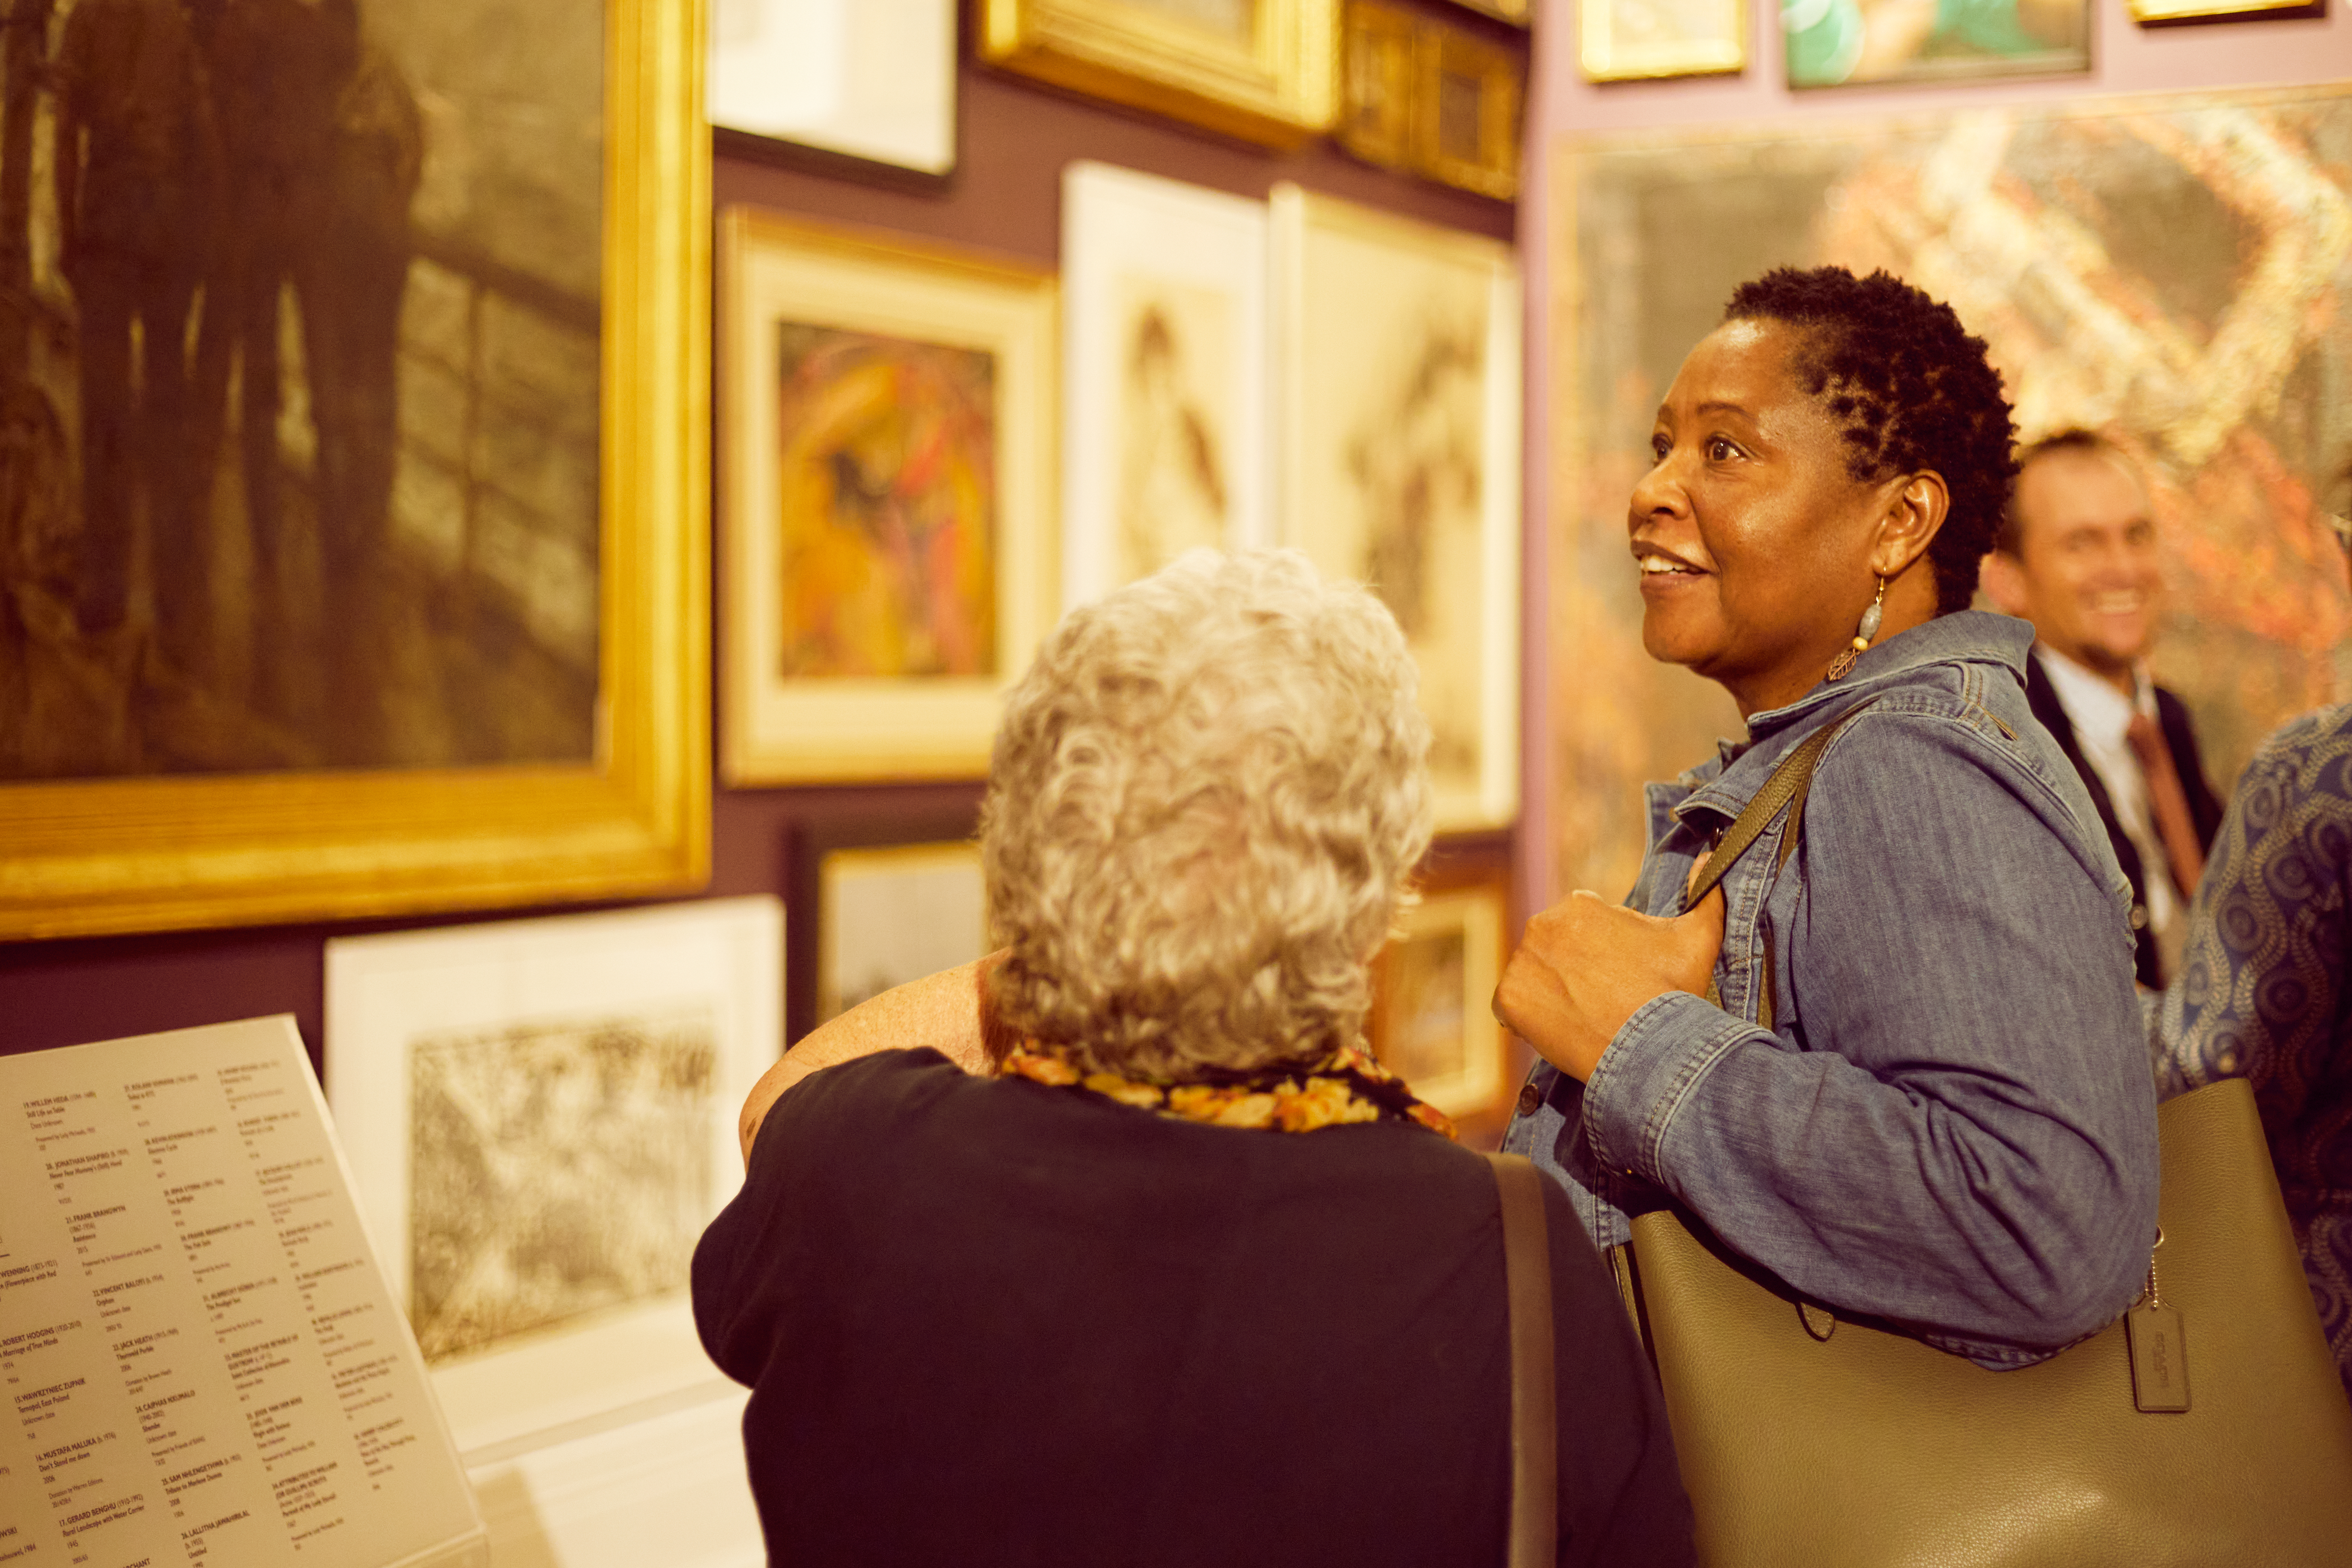 Visitors react to 'Breaking Down the Walls - 150 years of Art Collecting' at the Iziko South African National Gallery. Image: Iziko Museums of South Africa/N Pamplin.